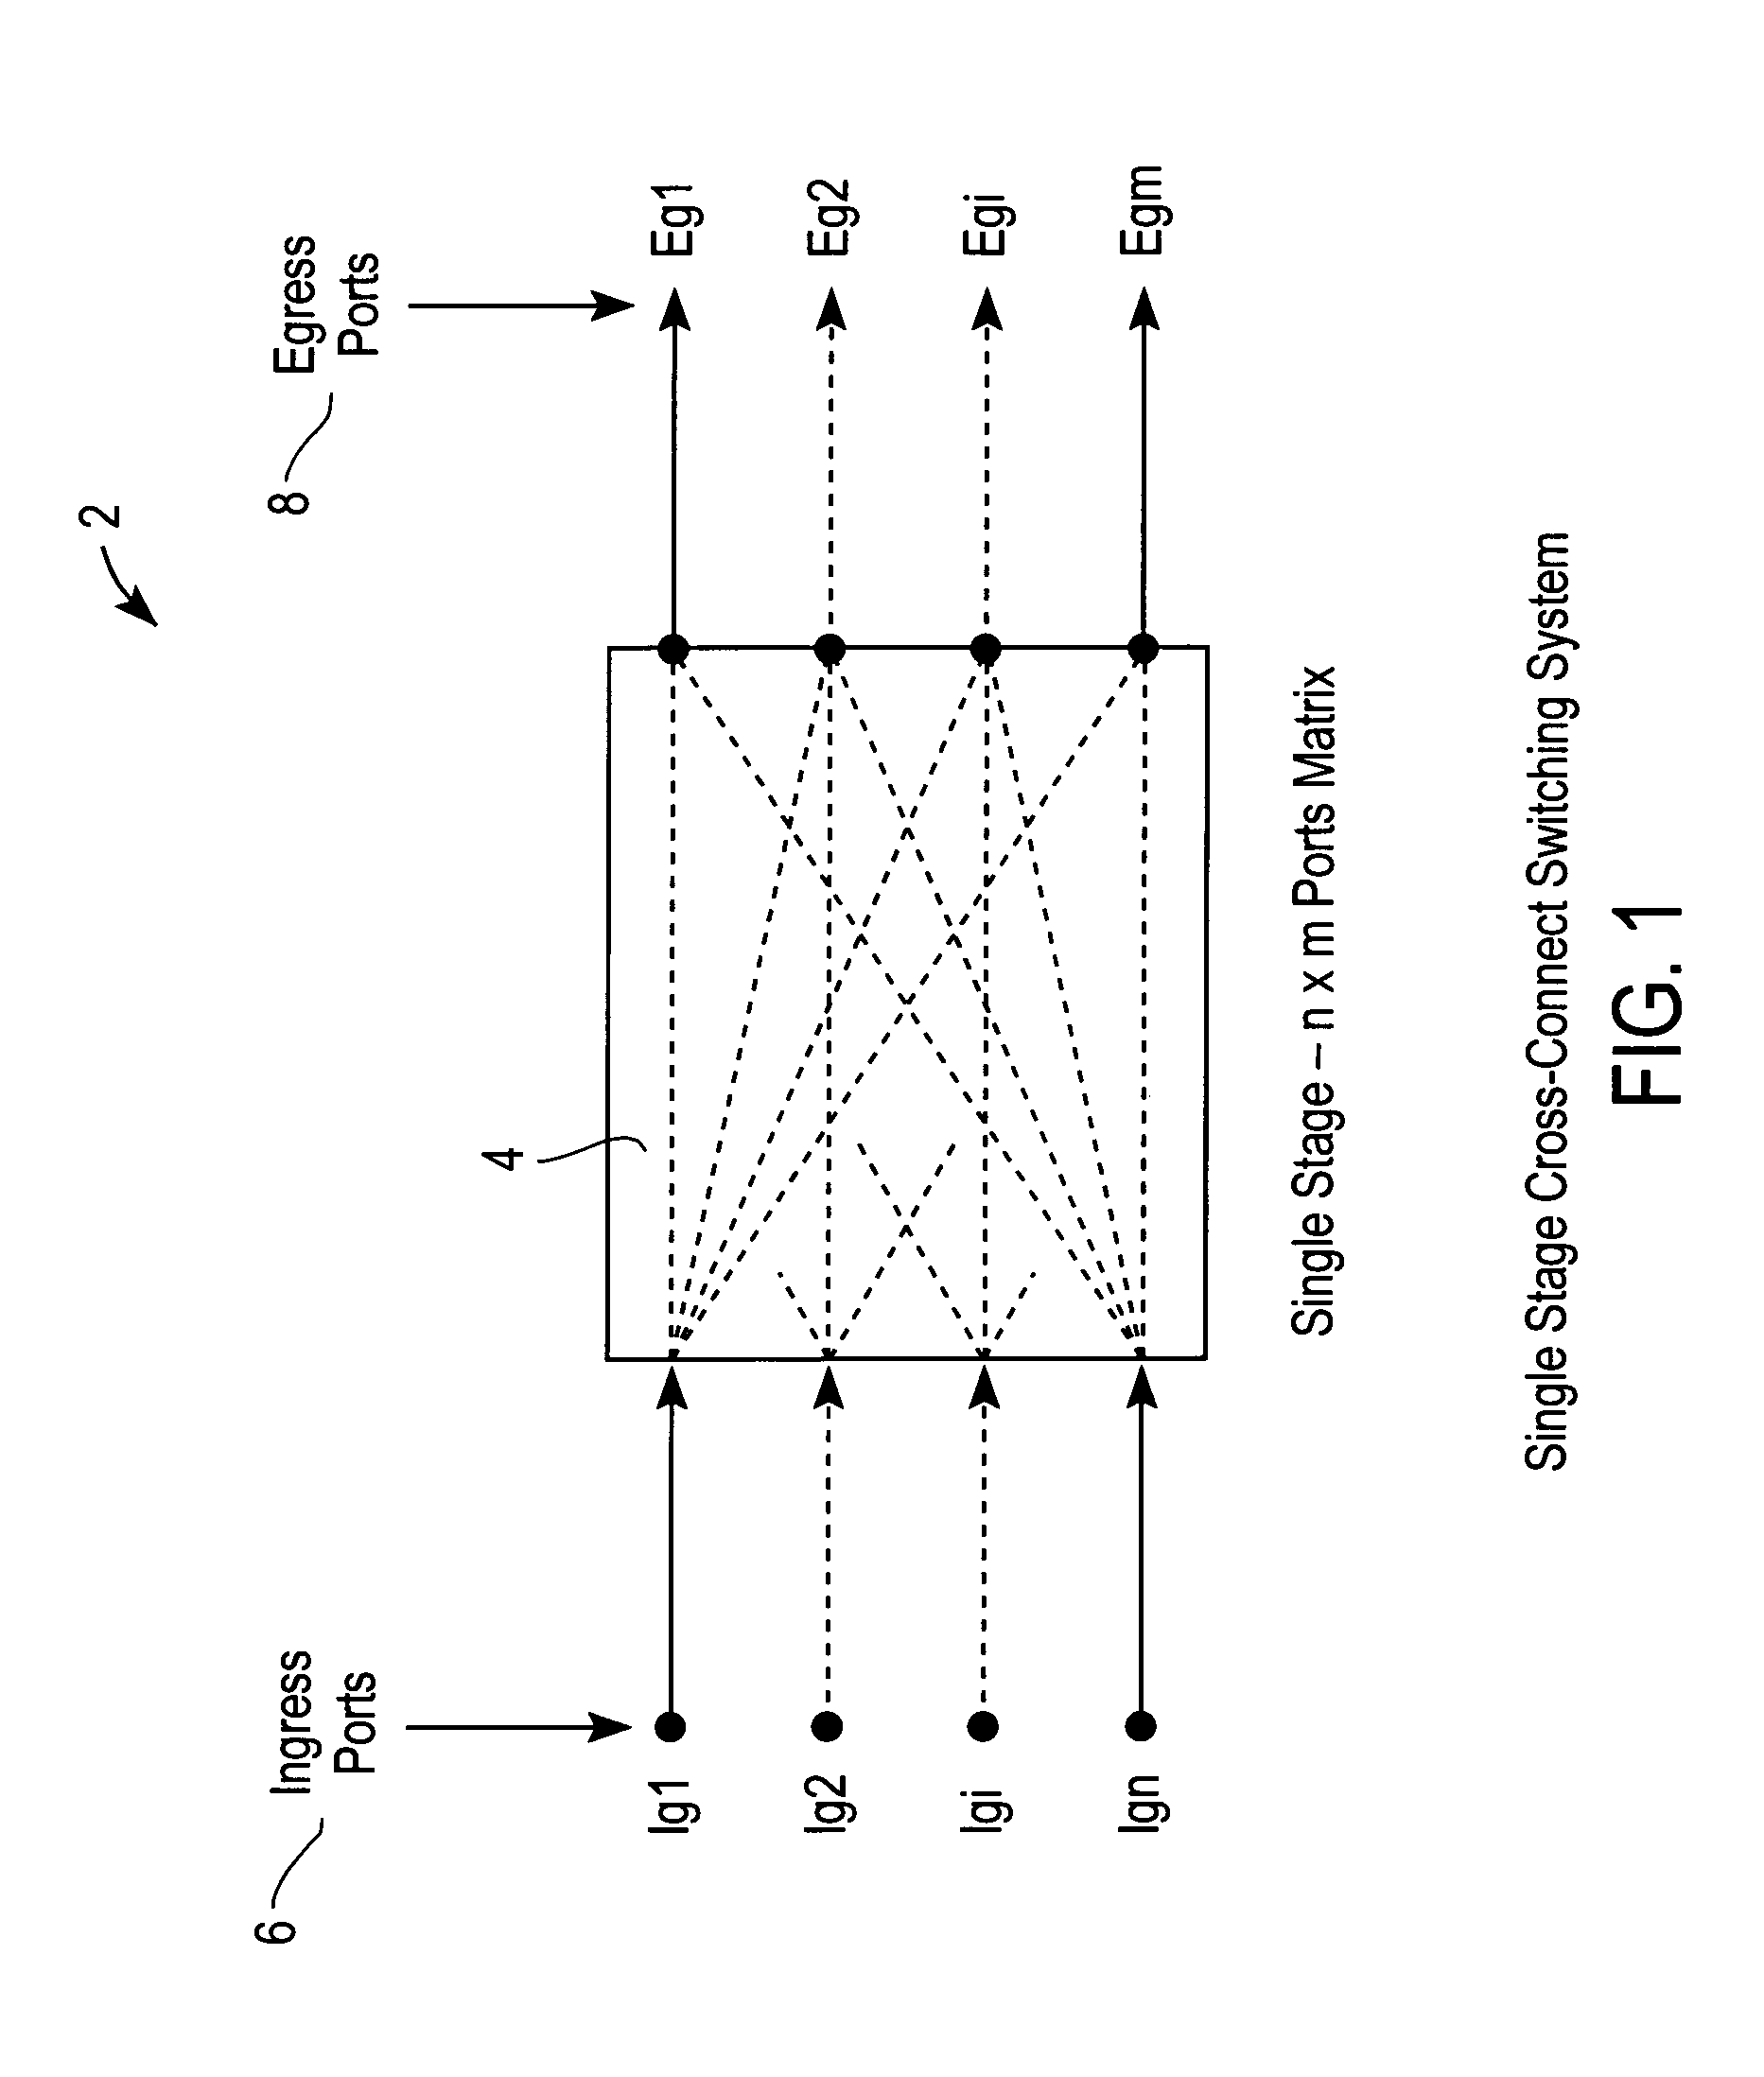 Physical architecture for design of high density metallic cross connect systems